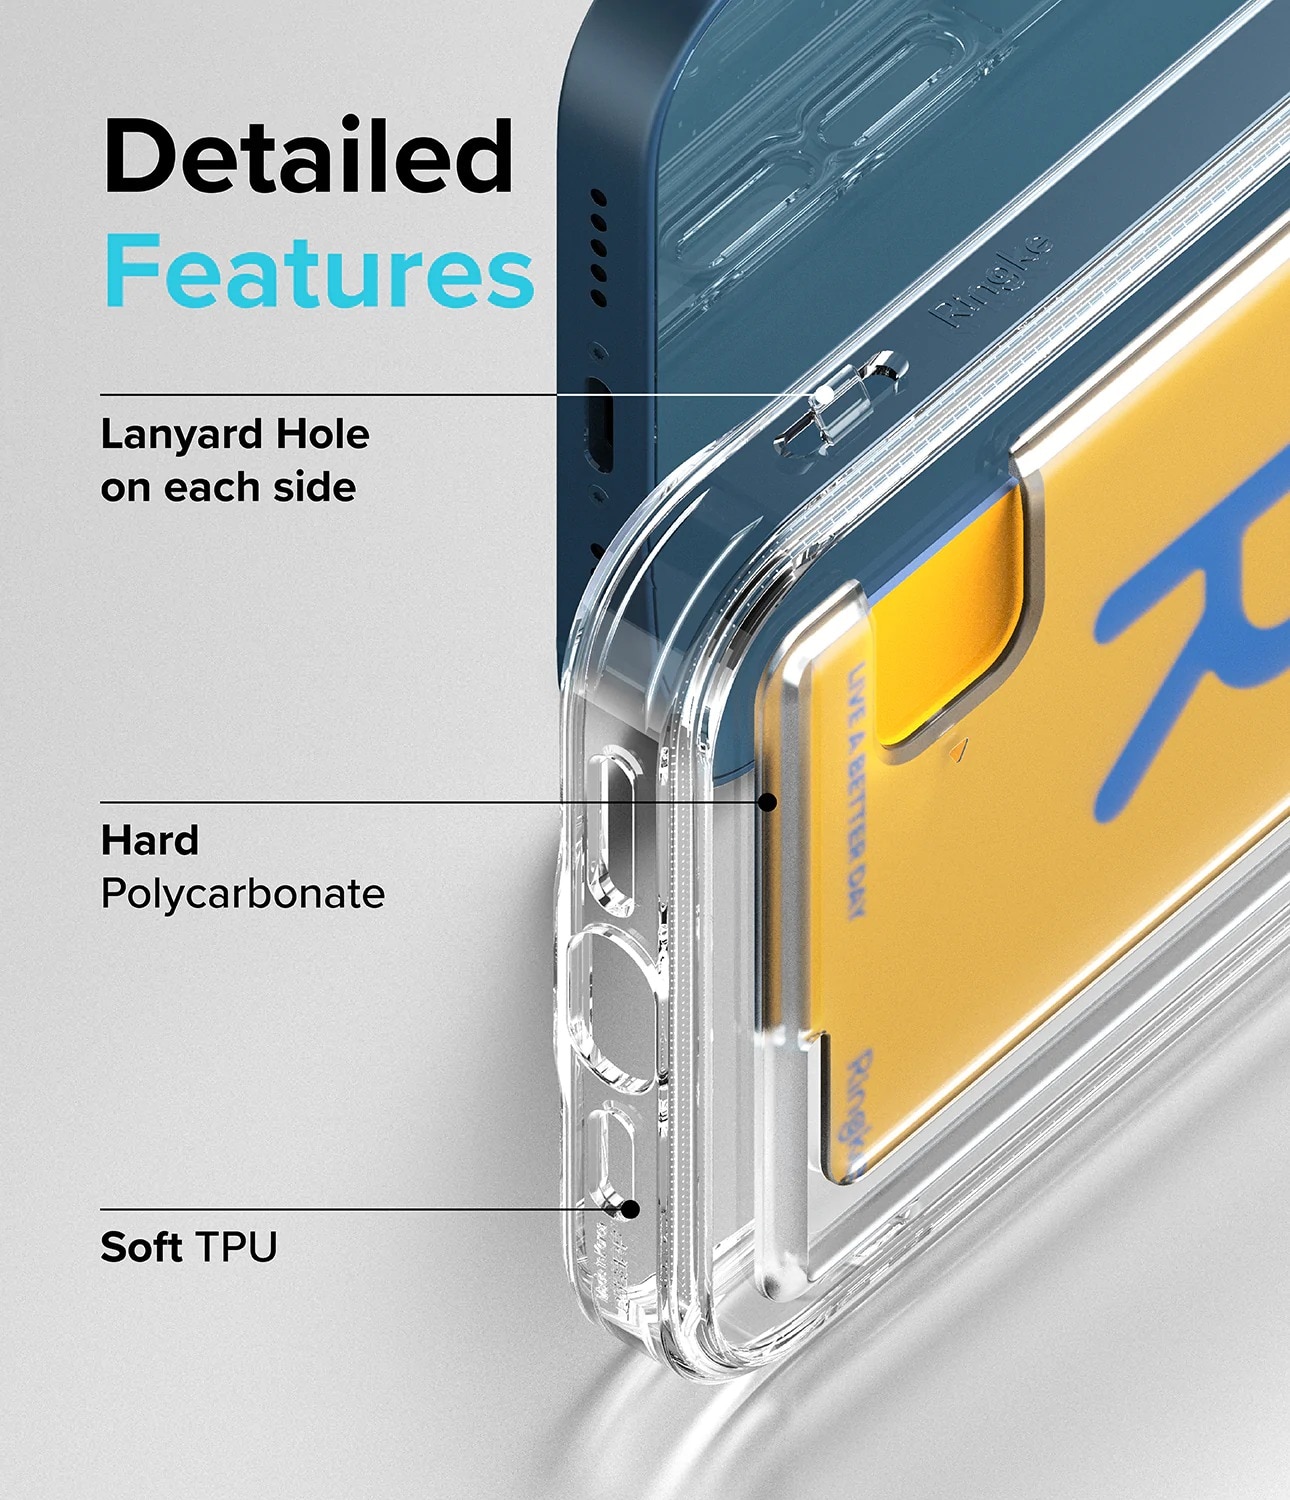 Fusion Card Case iPhone 13 Clear